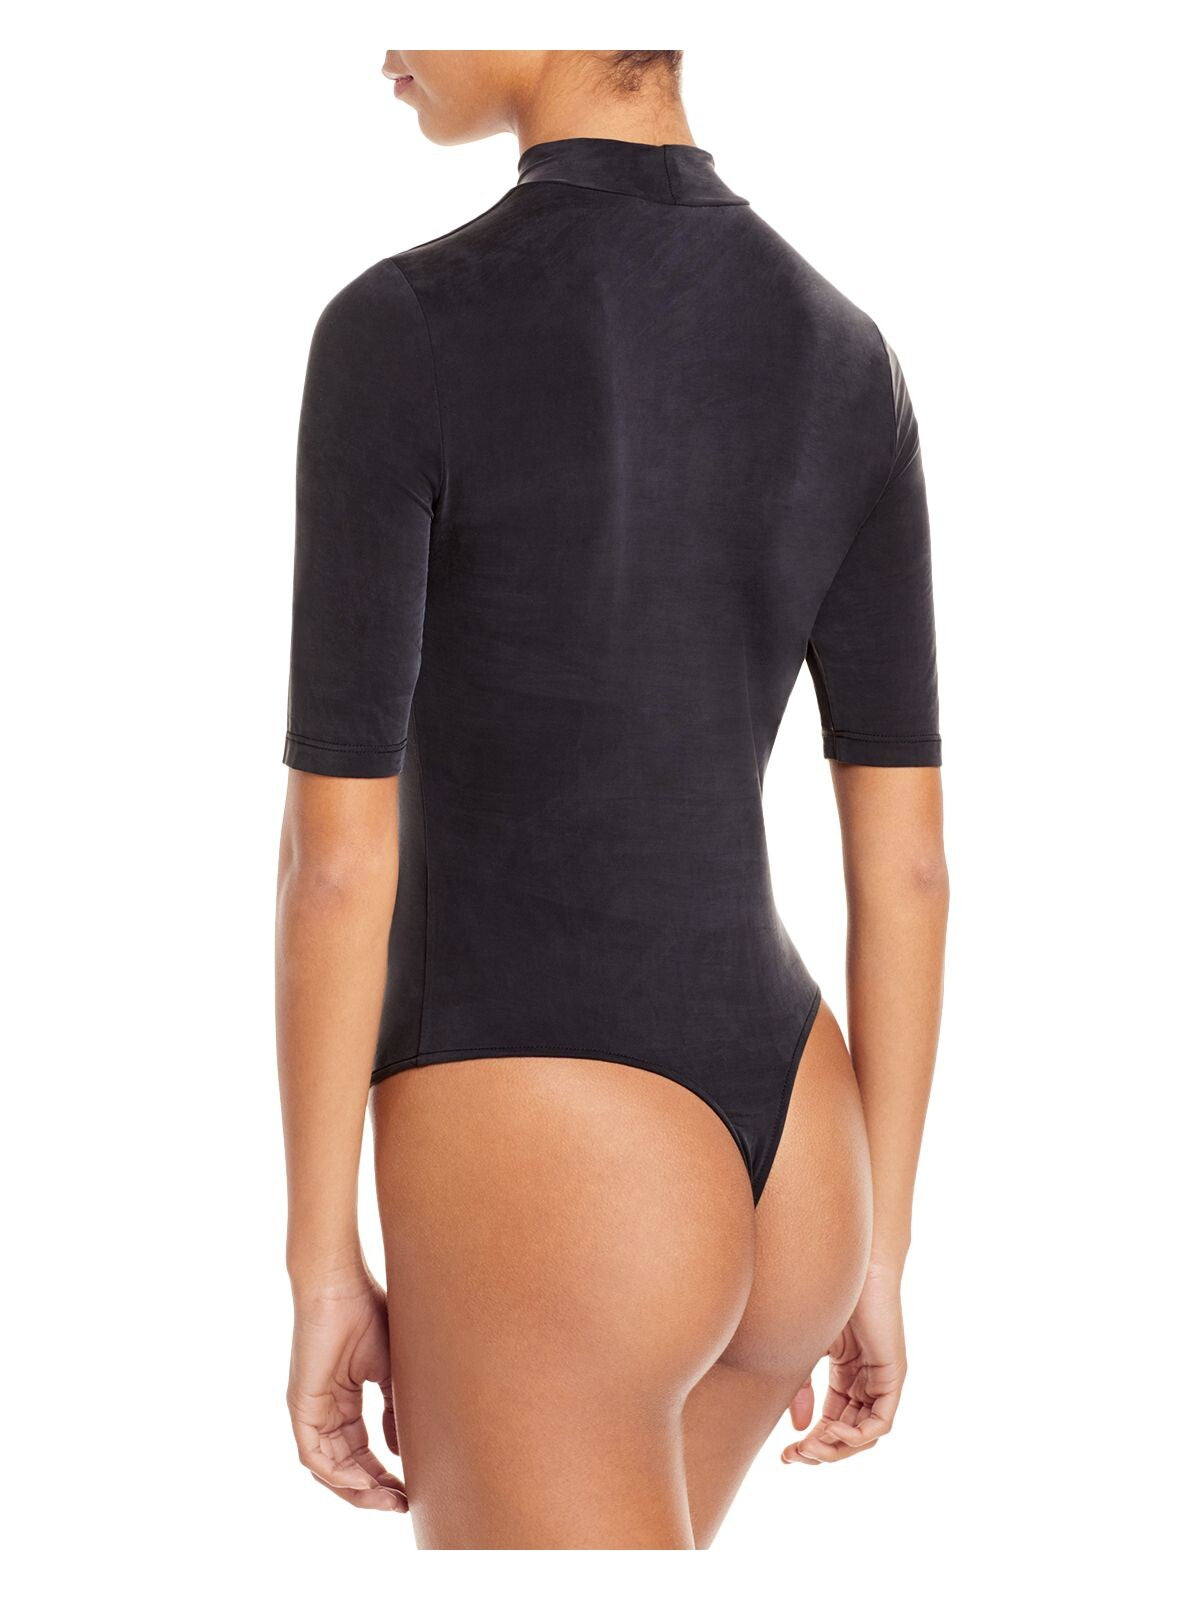 JONATHAN SIMKHAI Womens Black Cut Out Thong Hook And Eye Gusset Short Sleeve Mock Neck Body Suit Top XS